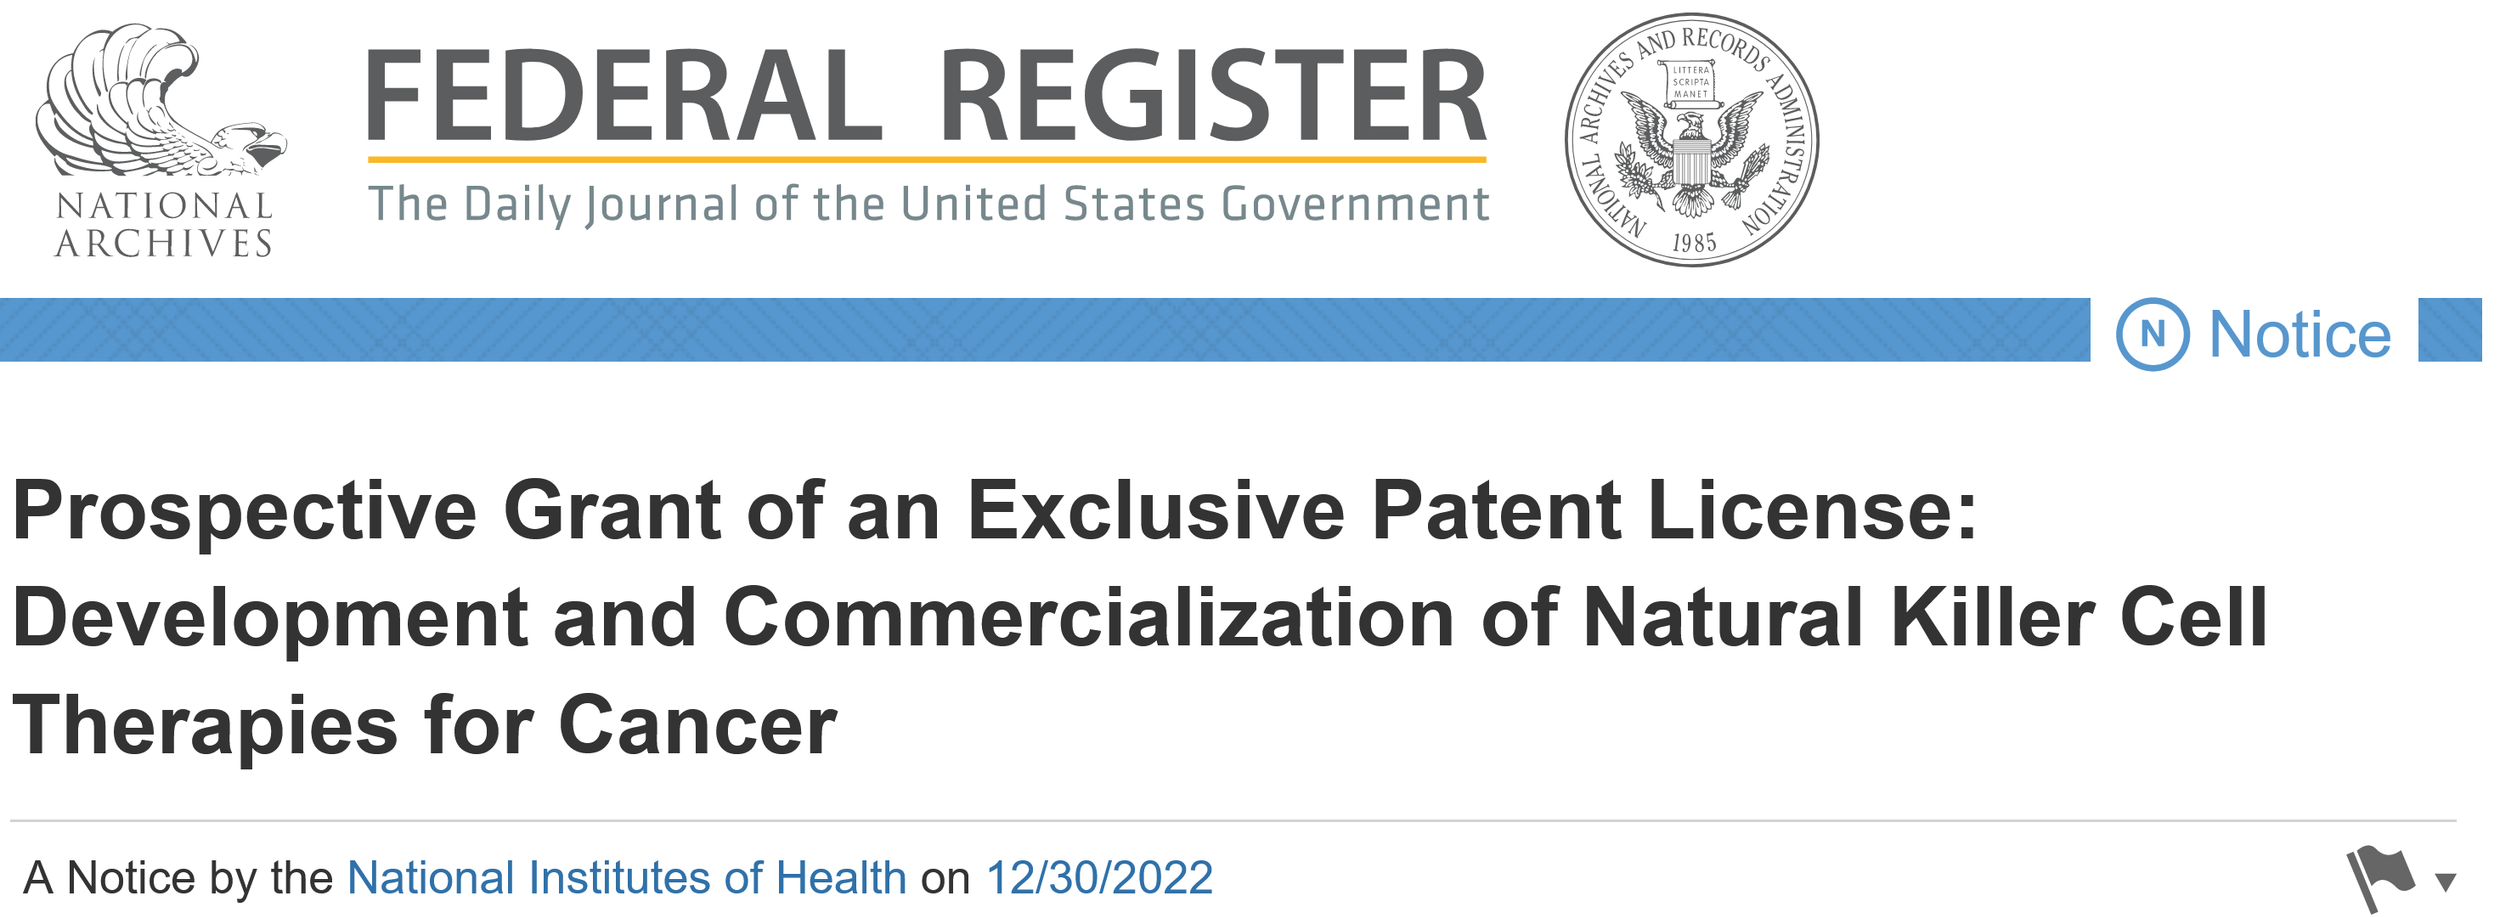 Screenshot 2022-12-30 at 11-33-02 Prospective Grant of an Exclusive Patent License Development and Commercialization of Natural Killer Cell Therapies for Cancer.png